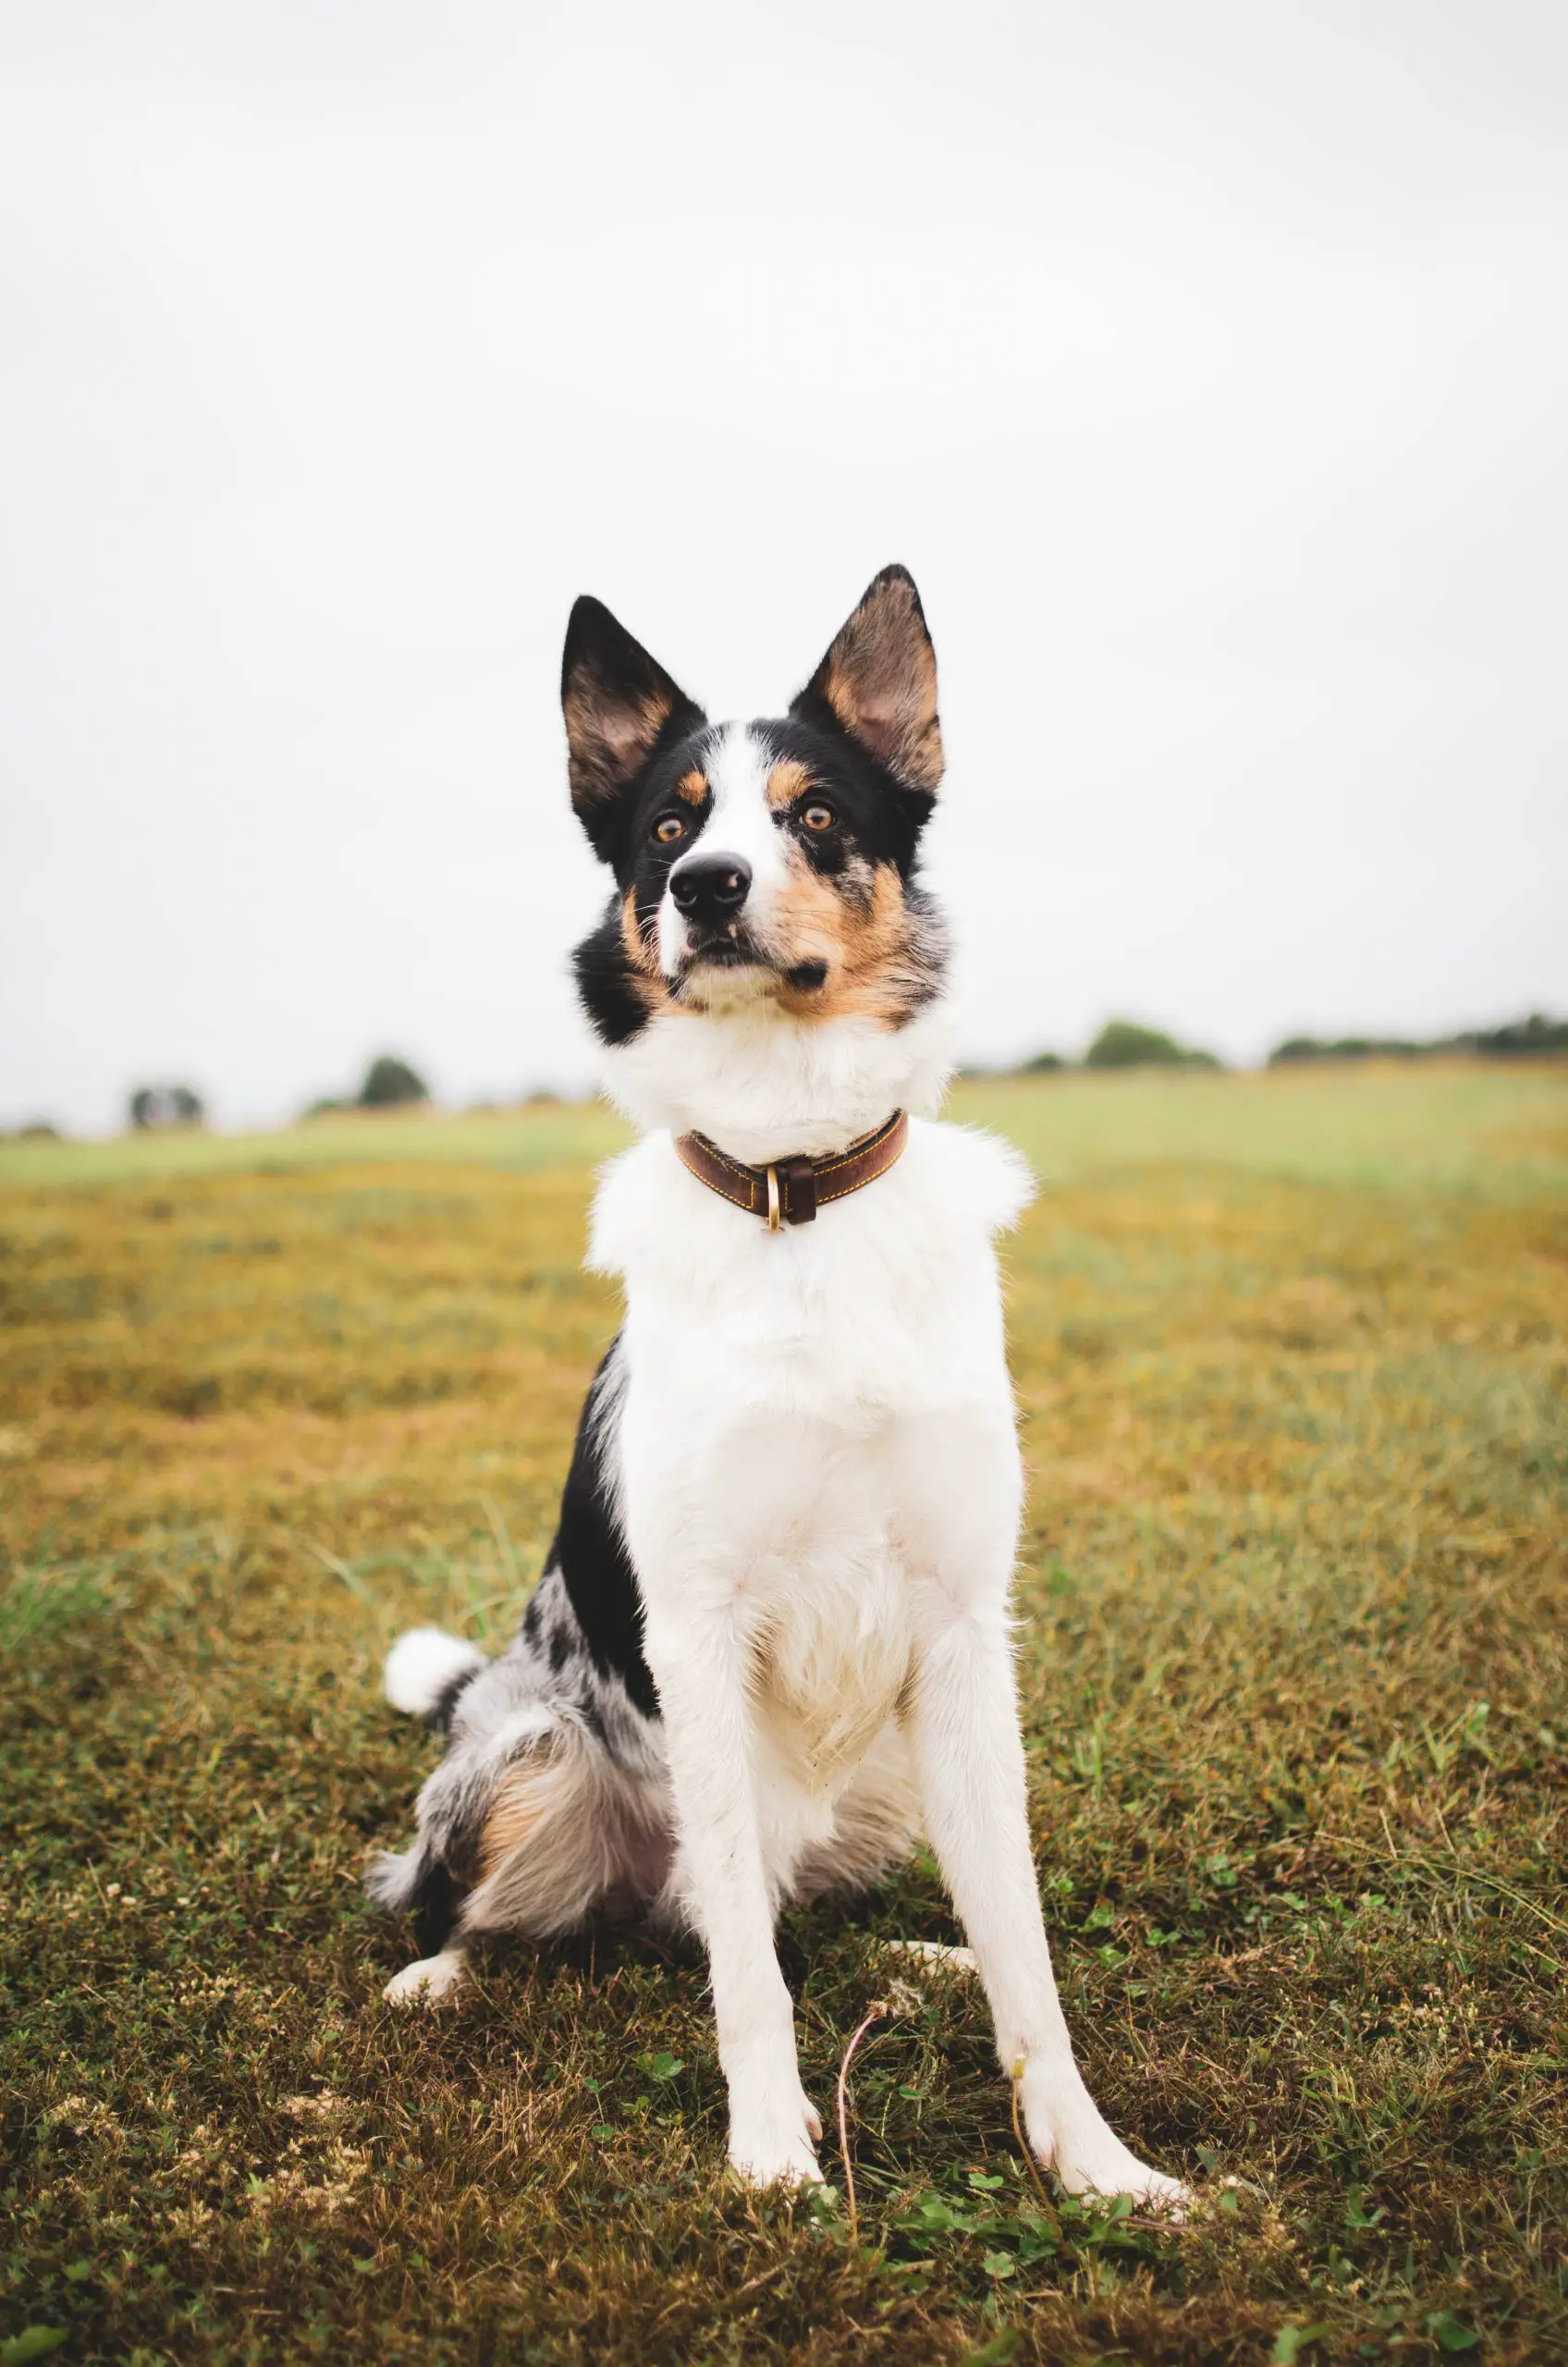 Black and white coated Border Collie sitting on the grass